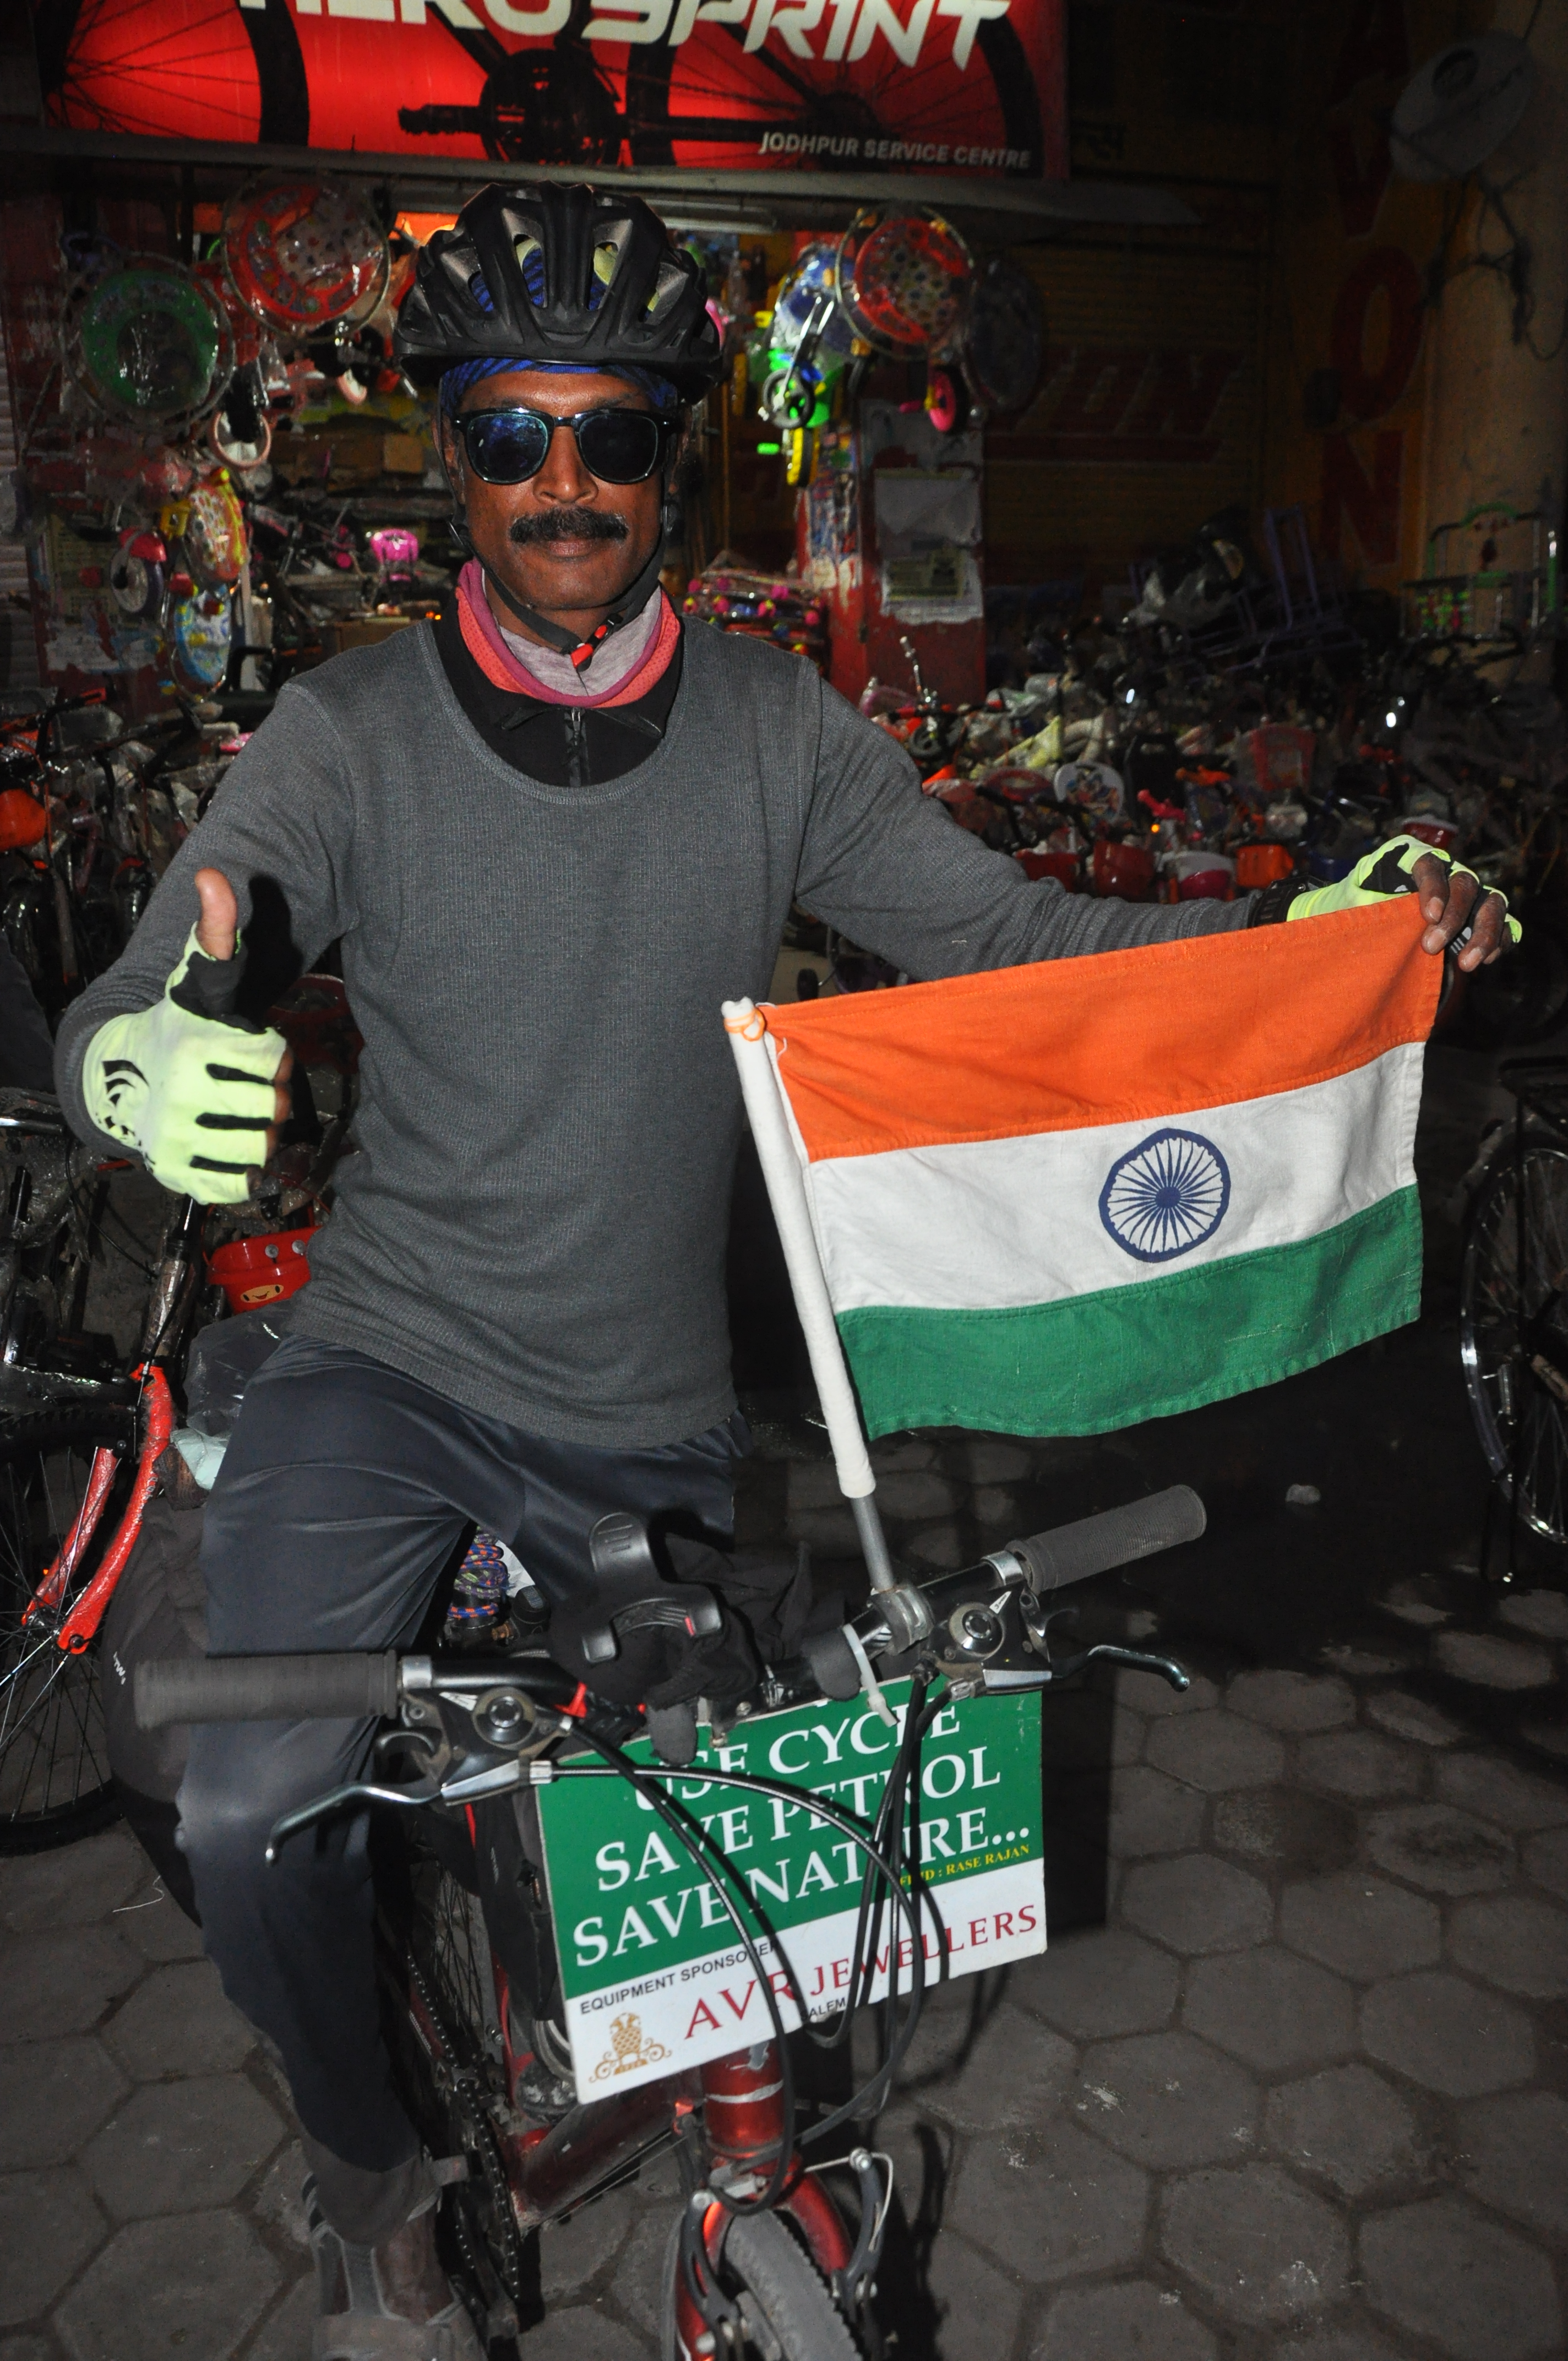 Cycle riders are giving a message save petrol and environment